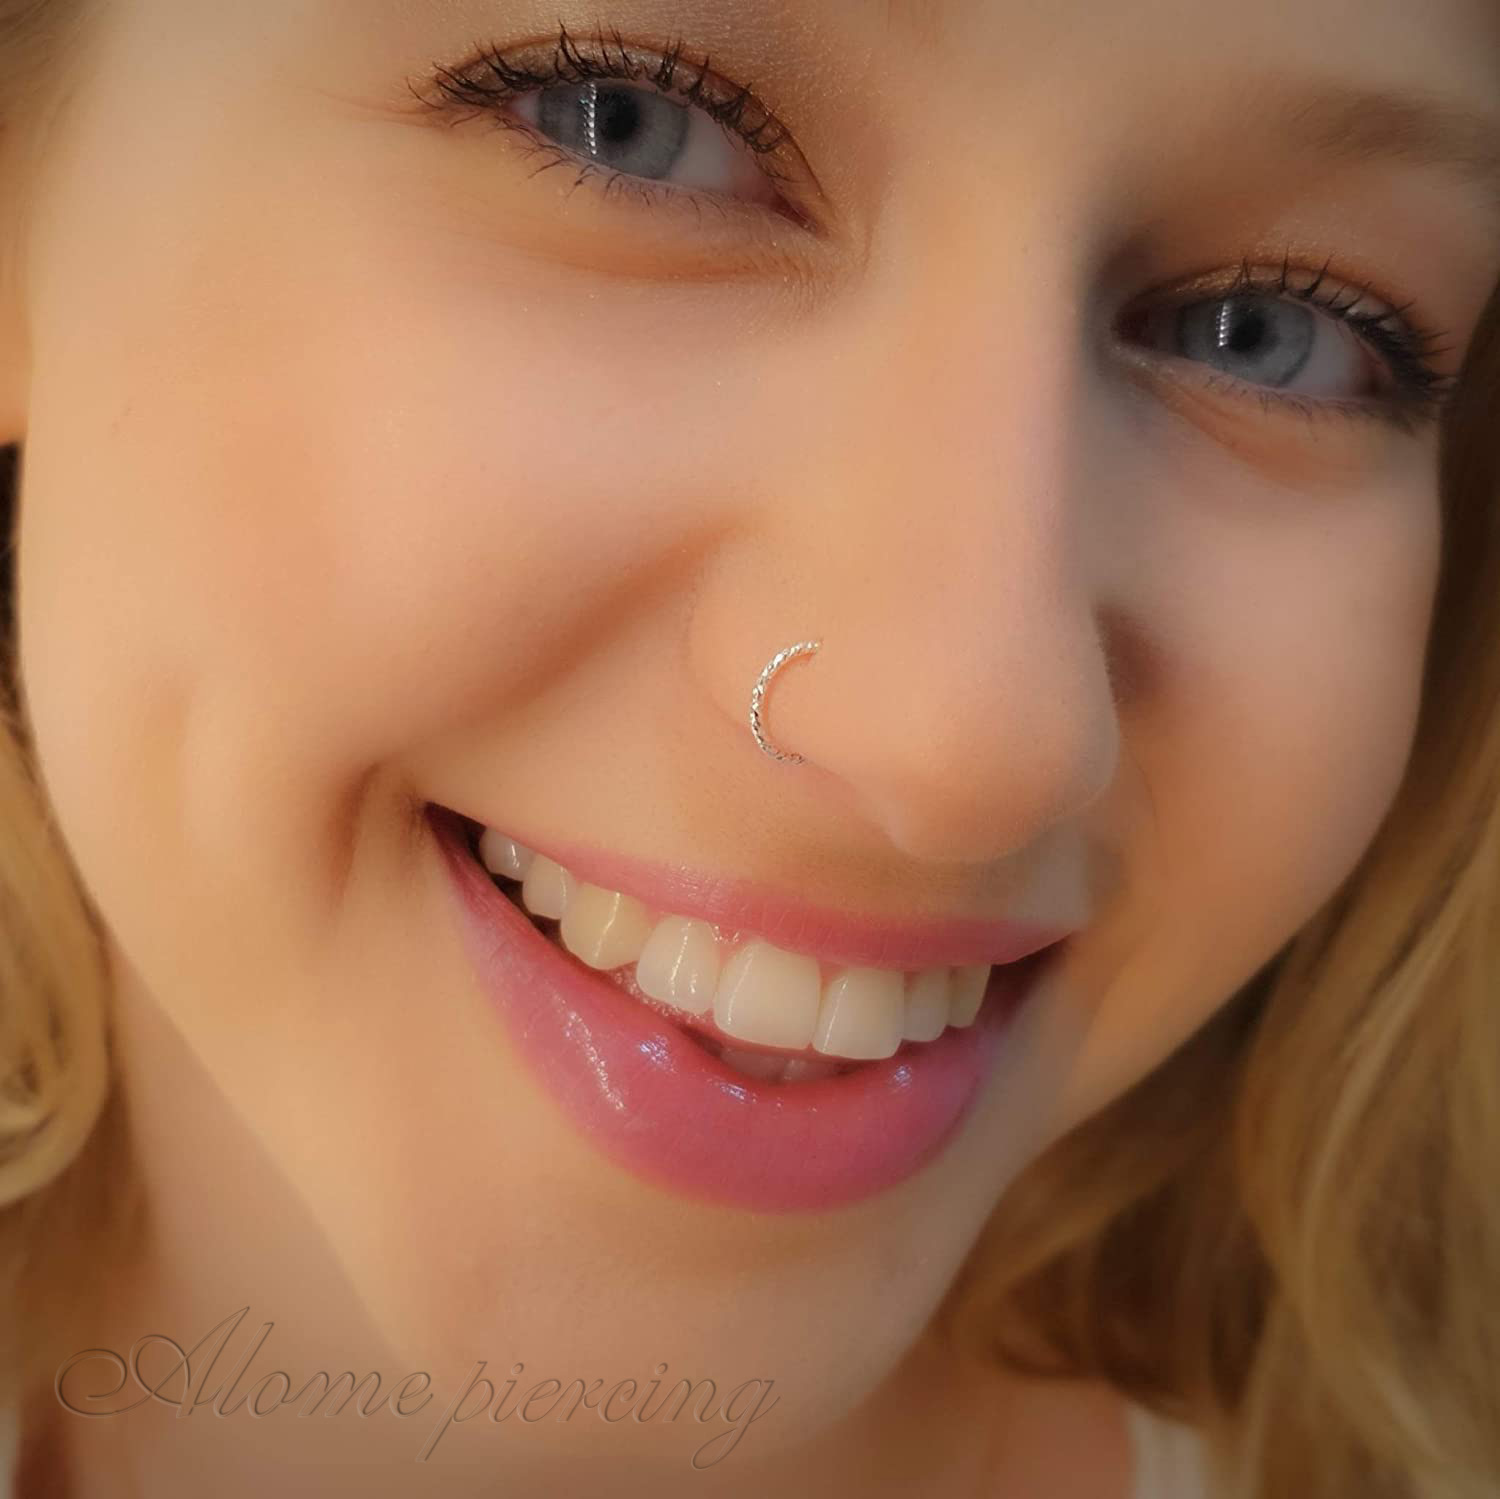 Tiny Silver Nose Ring Hoop - 24 Gauge Snug Nose Hoop Thin Nose Piercings  Hoops - Nose Piercing Rings on Galleon Philippines